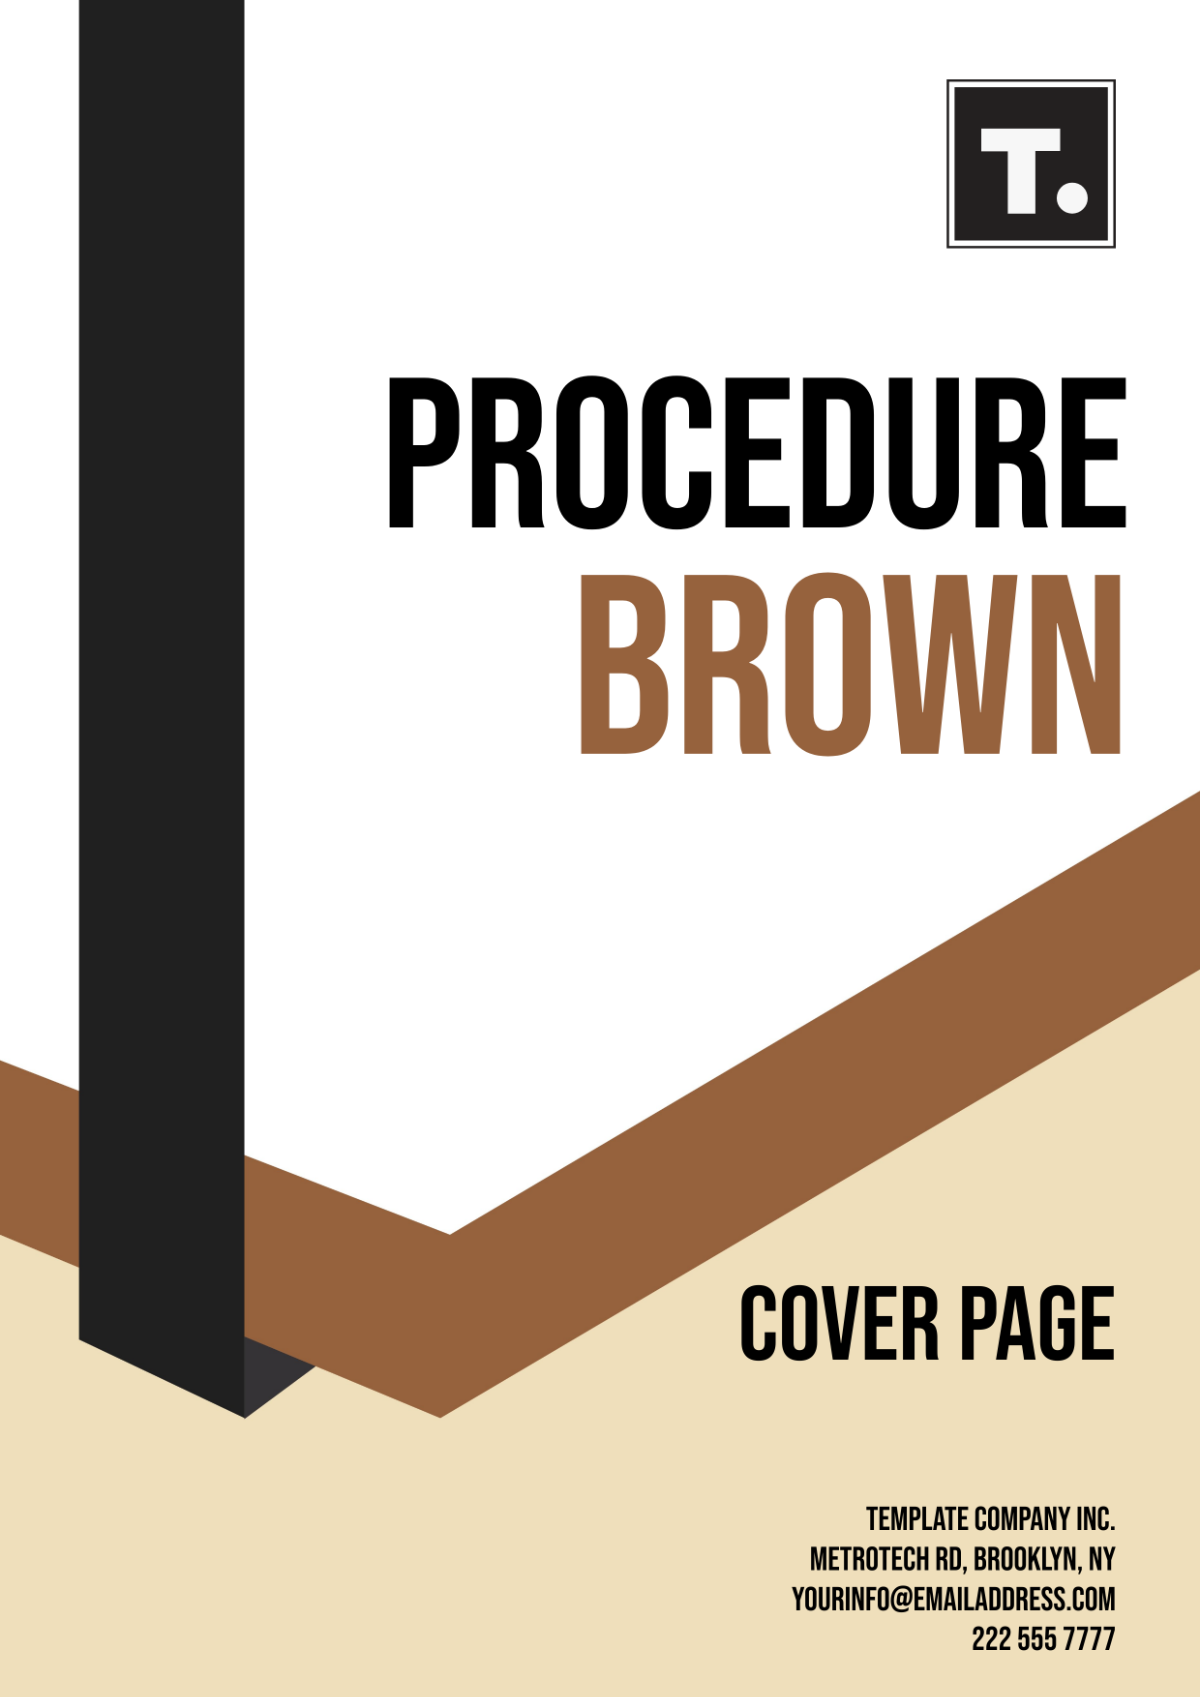 Procedure Brown Cover Page